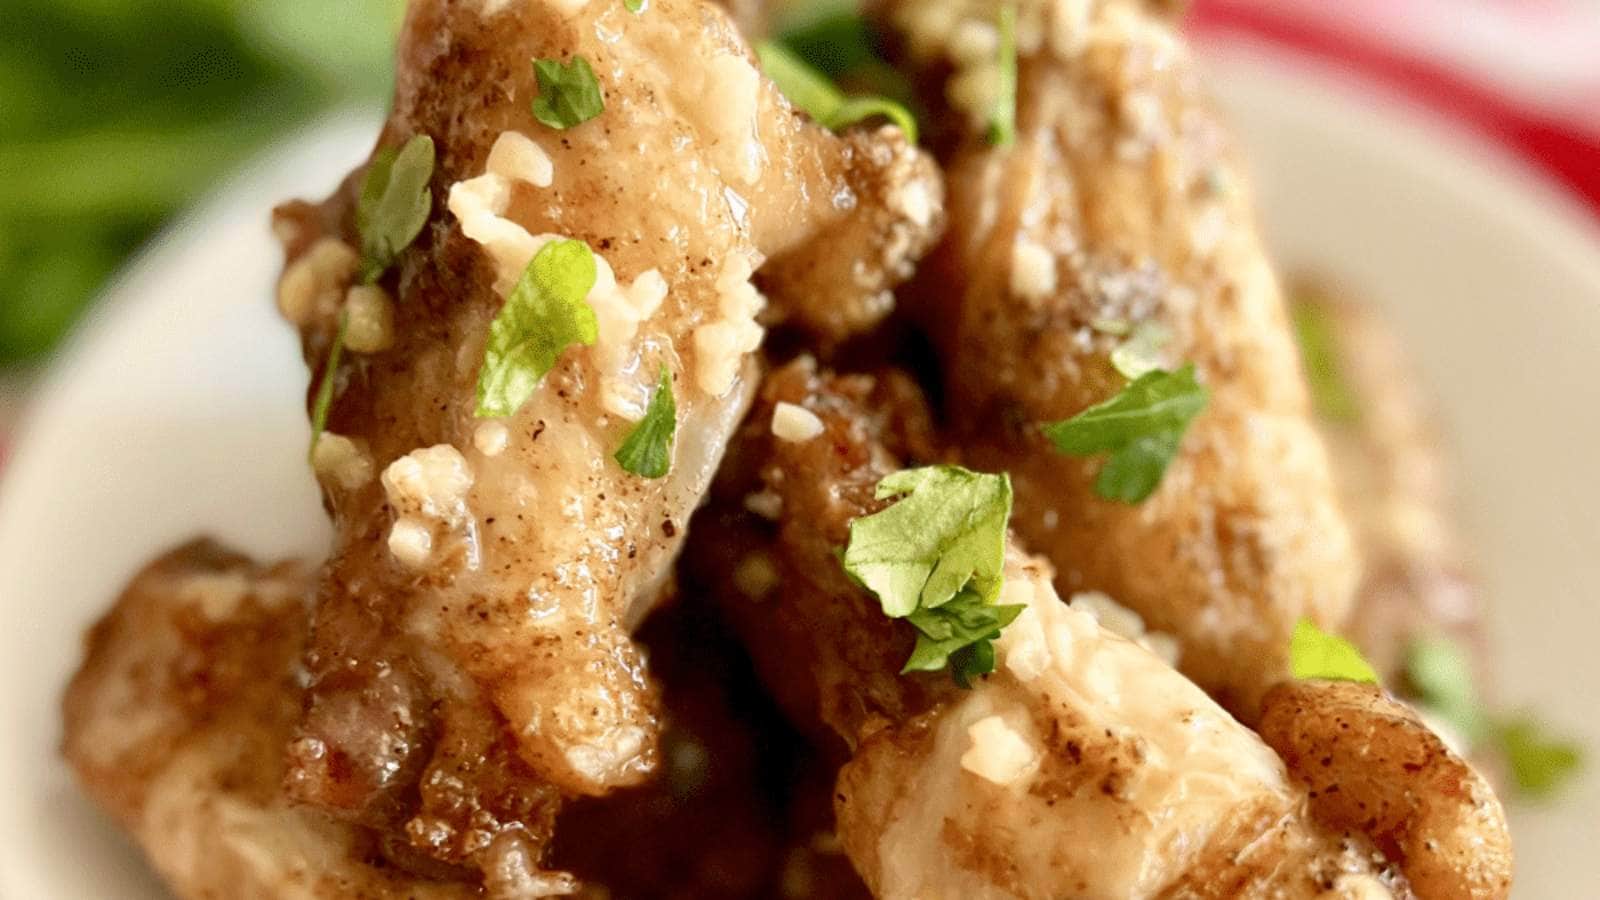 Garlic Butter Wings recipe by The Short Order Cook.